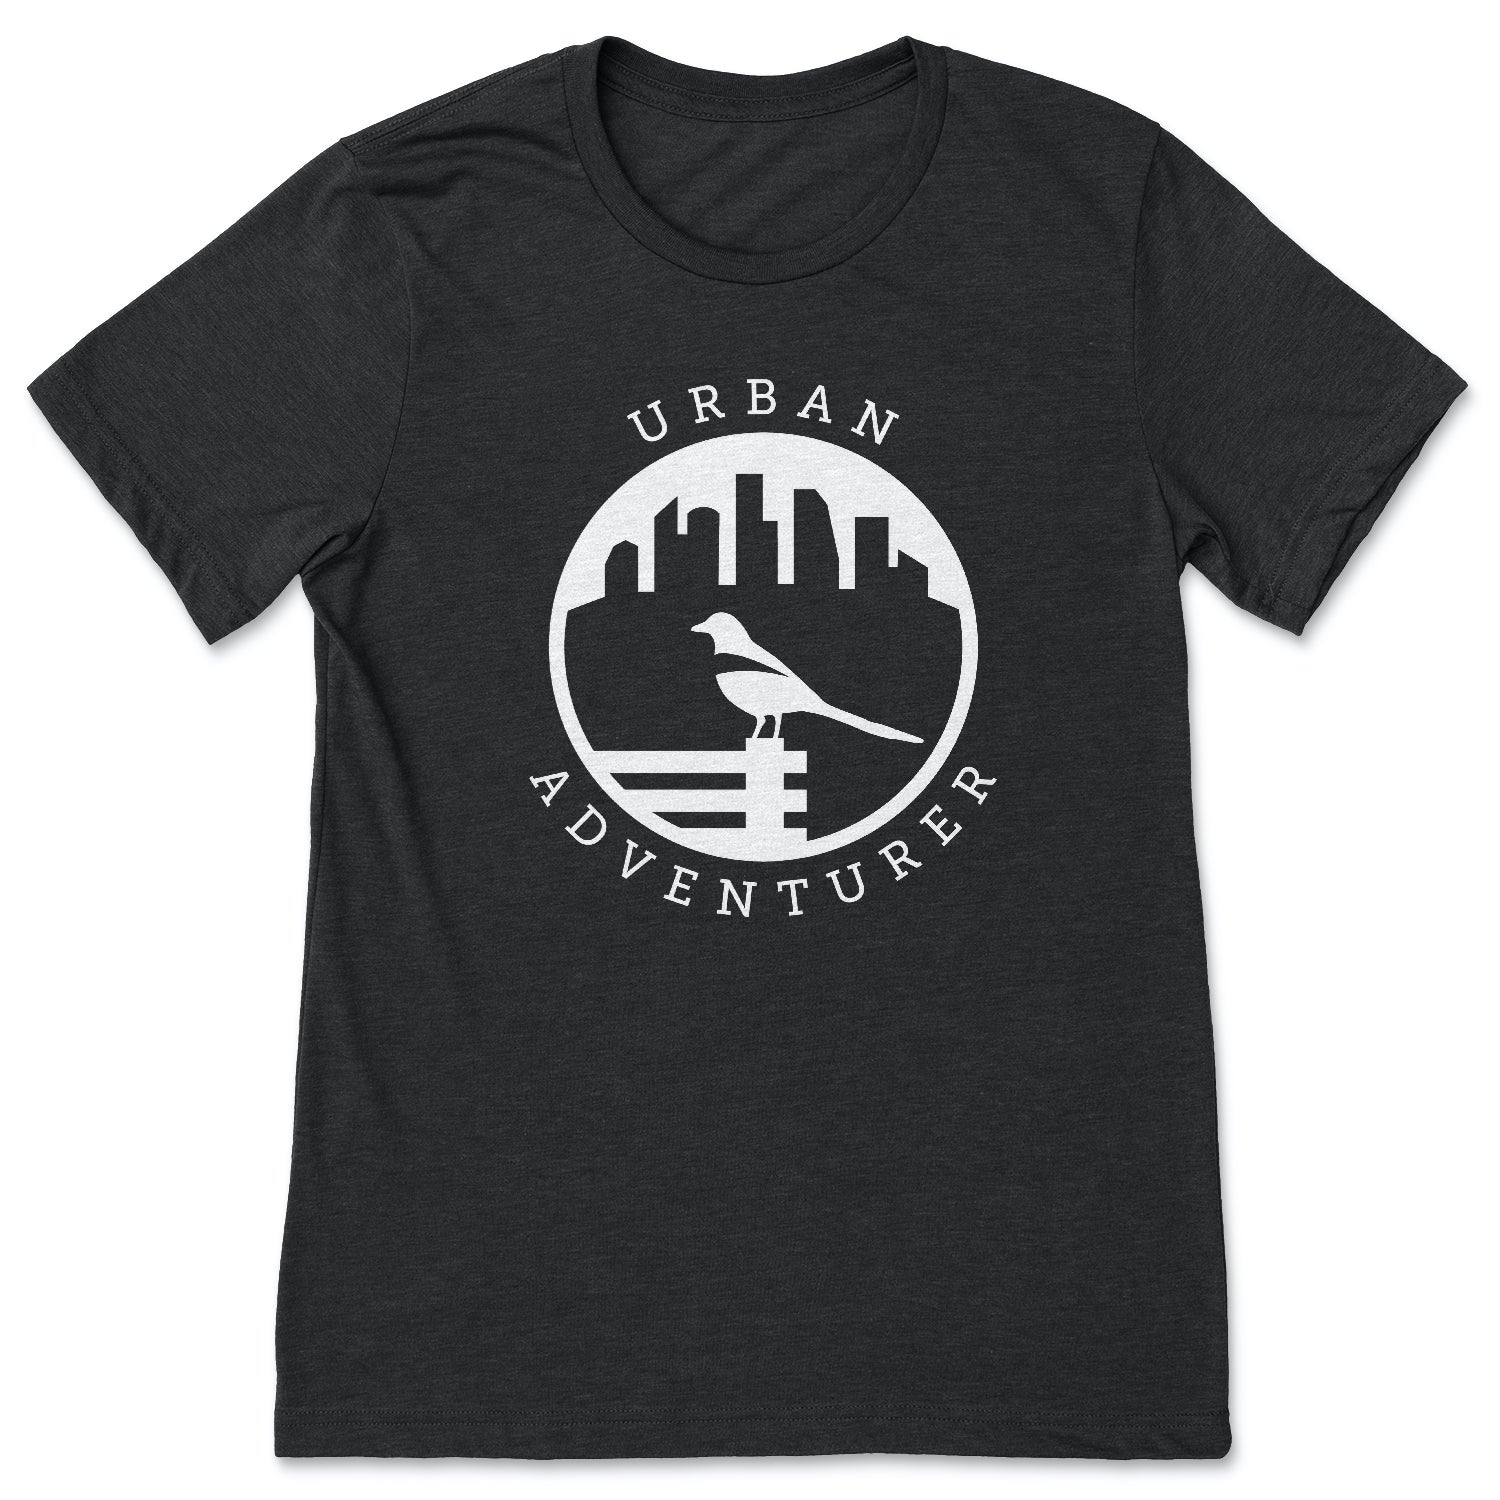 This black t-shirt contains a white silhouette of a magpie perched on a bench.  In the background is a city skyline.  